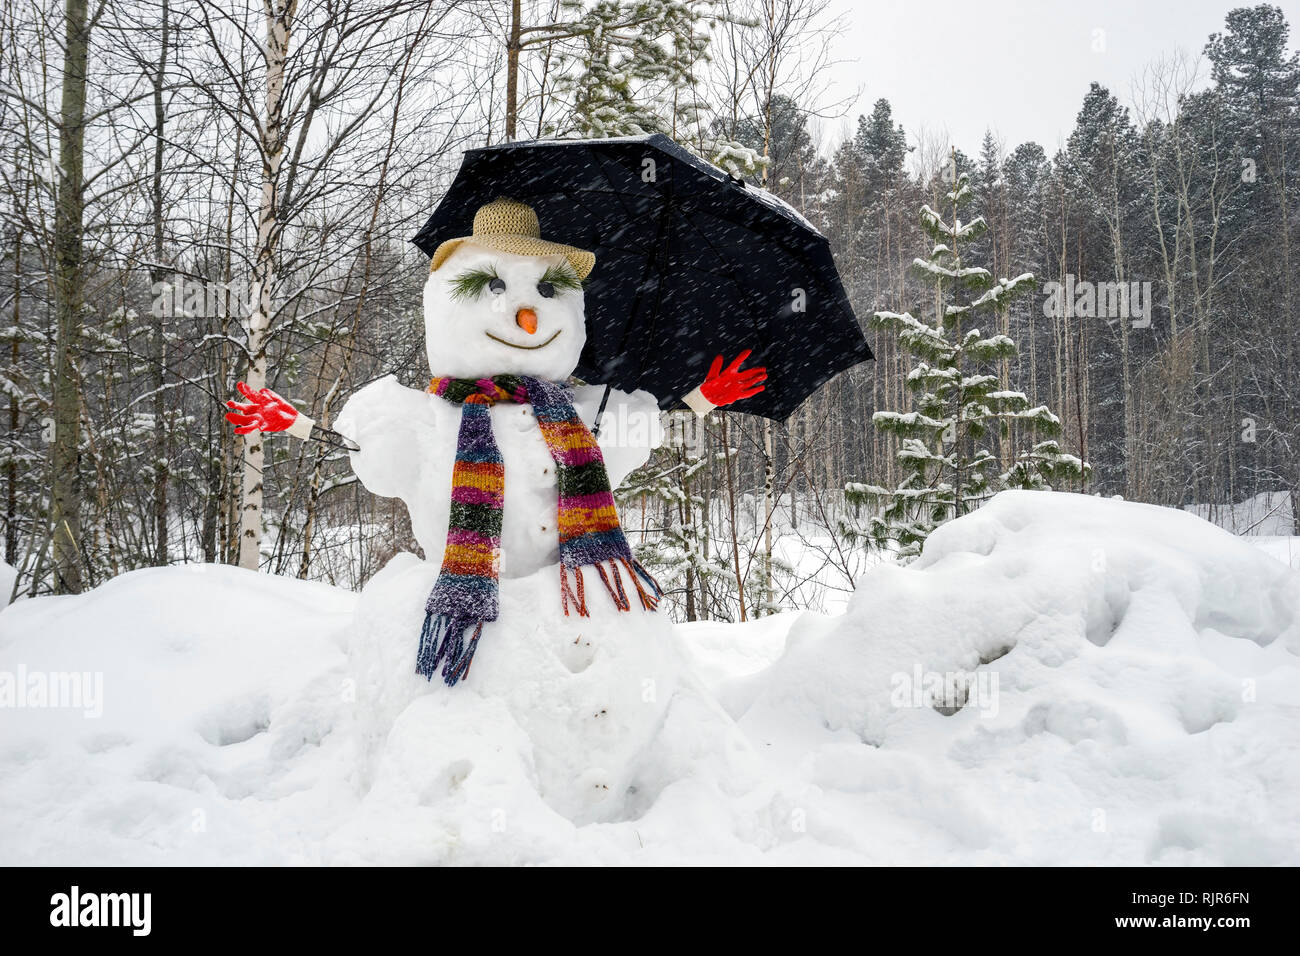 Funny snowman with an umbrella. Stock Photo